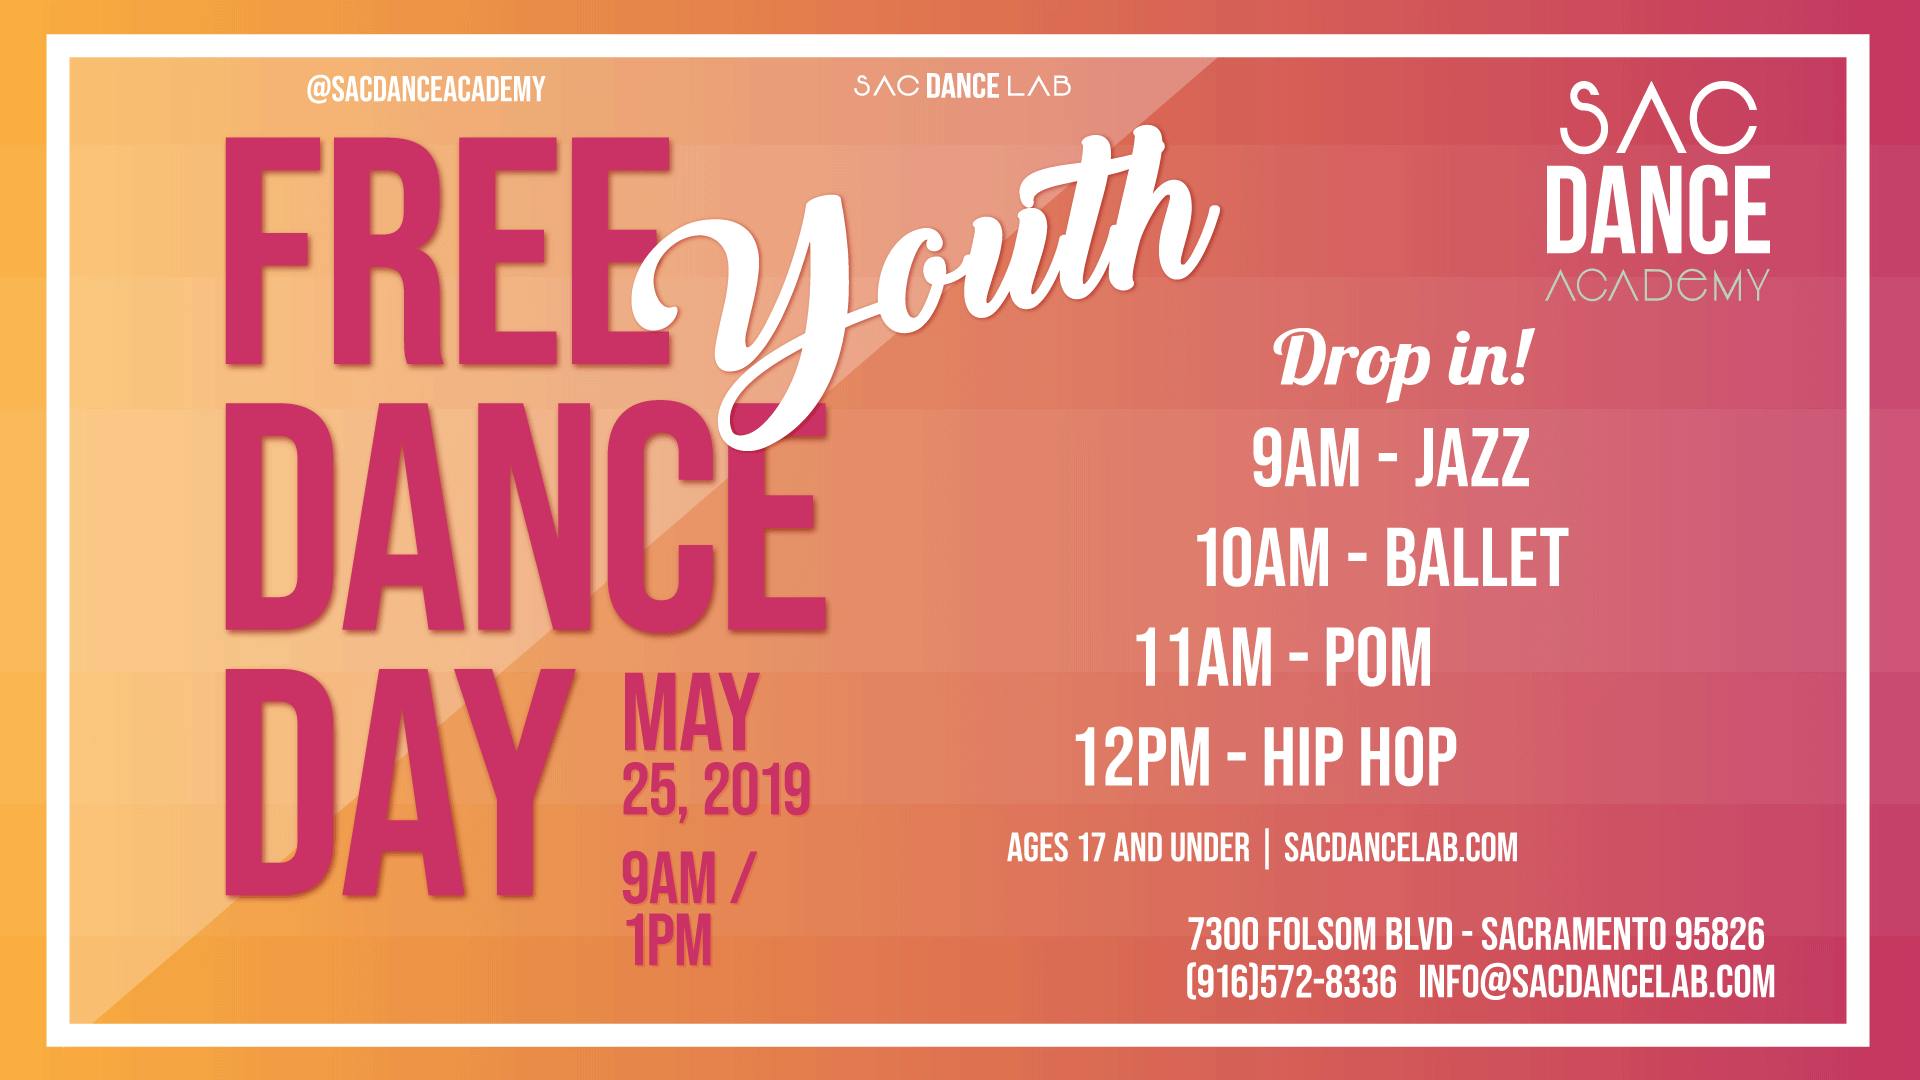 Free Youth Dance Day